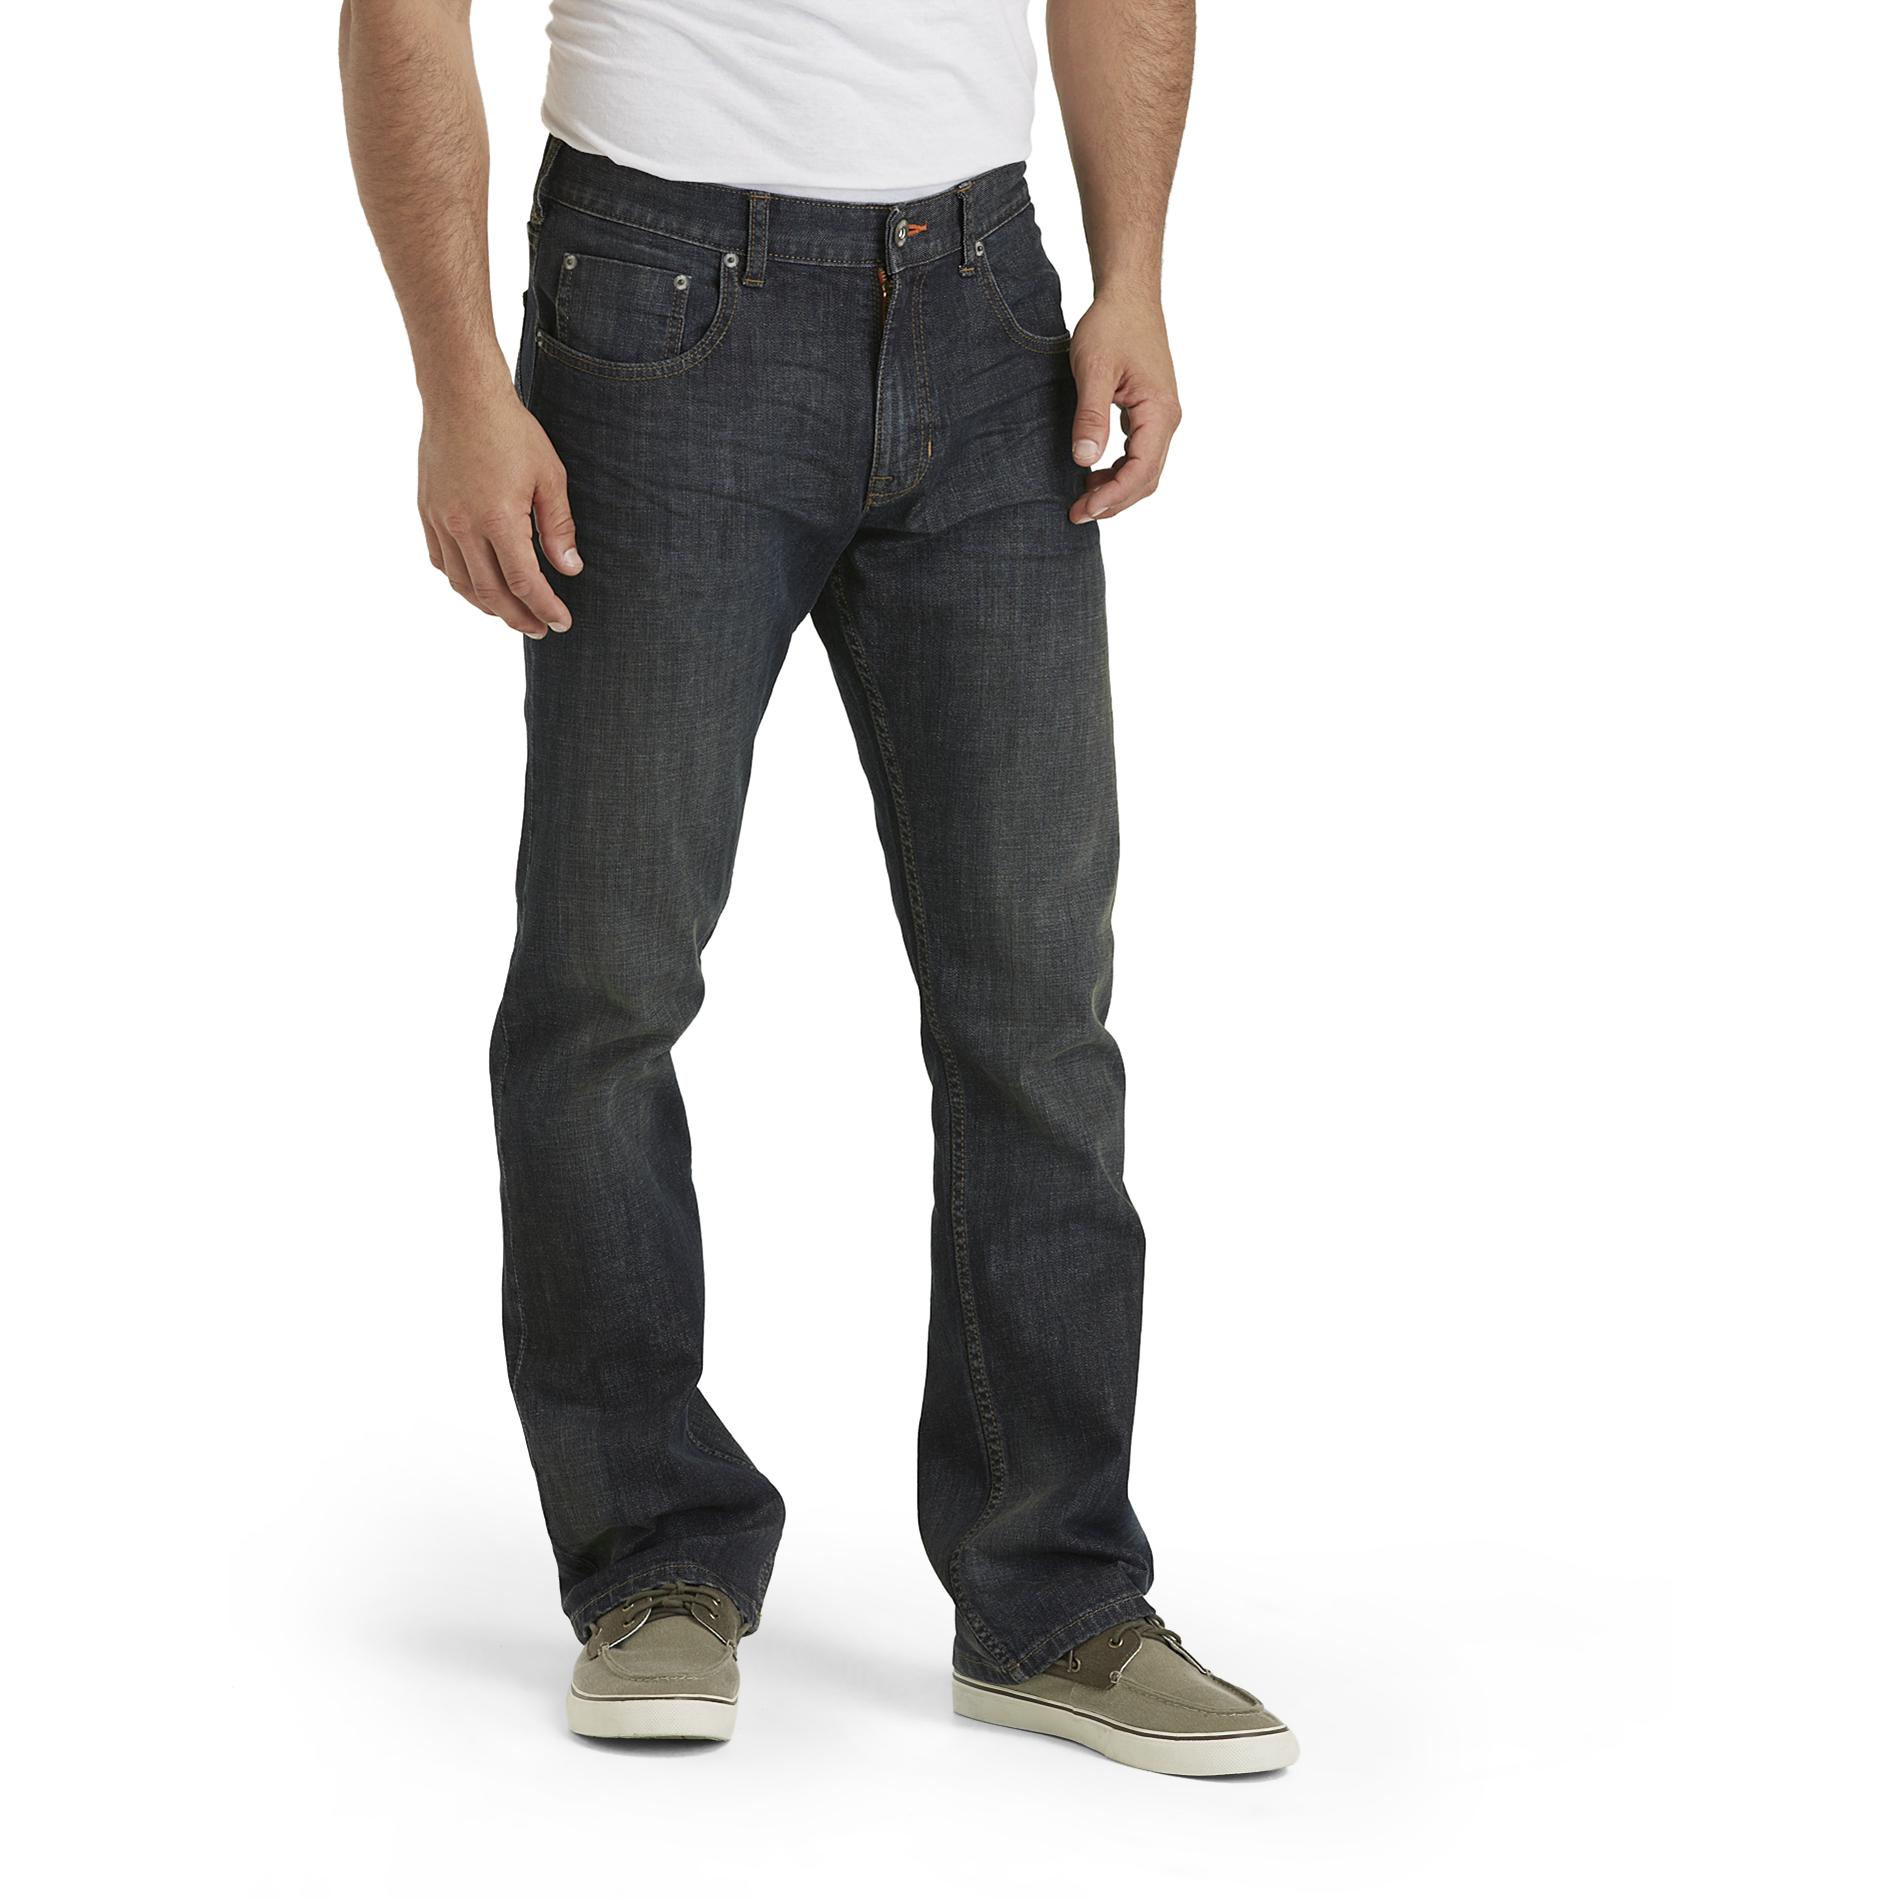 LEE Men's Relaxed Fit Straight Leg Jeans